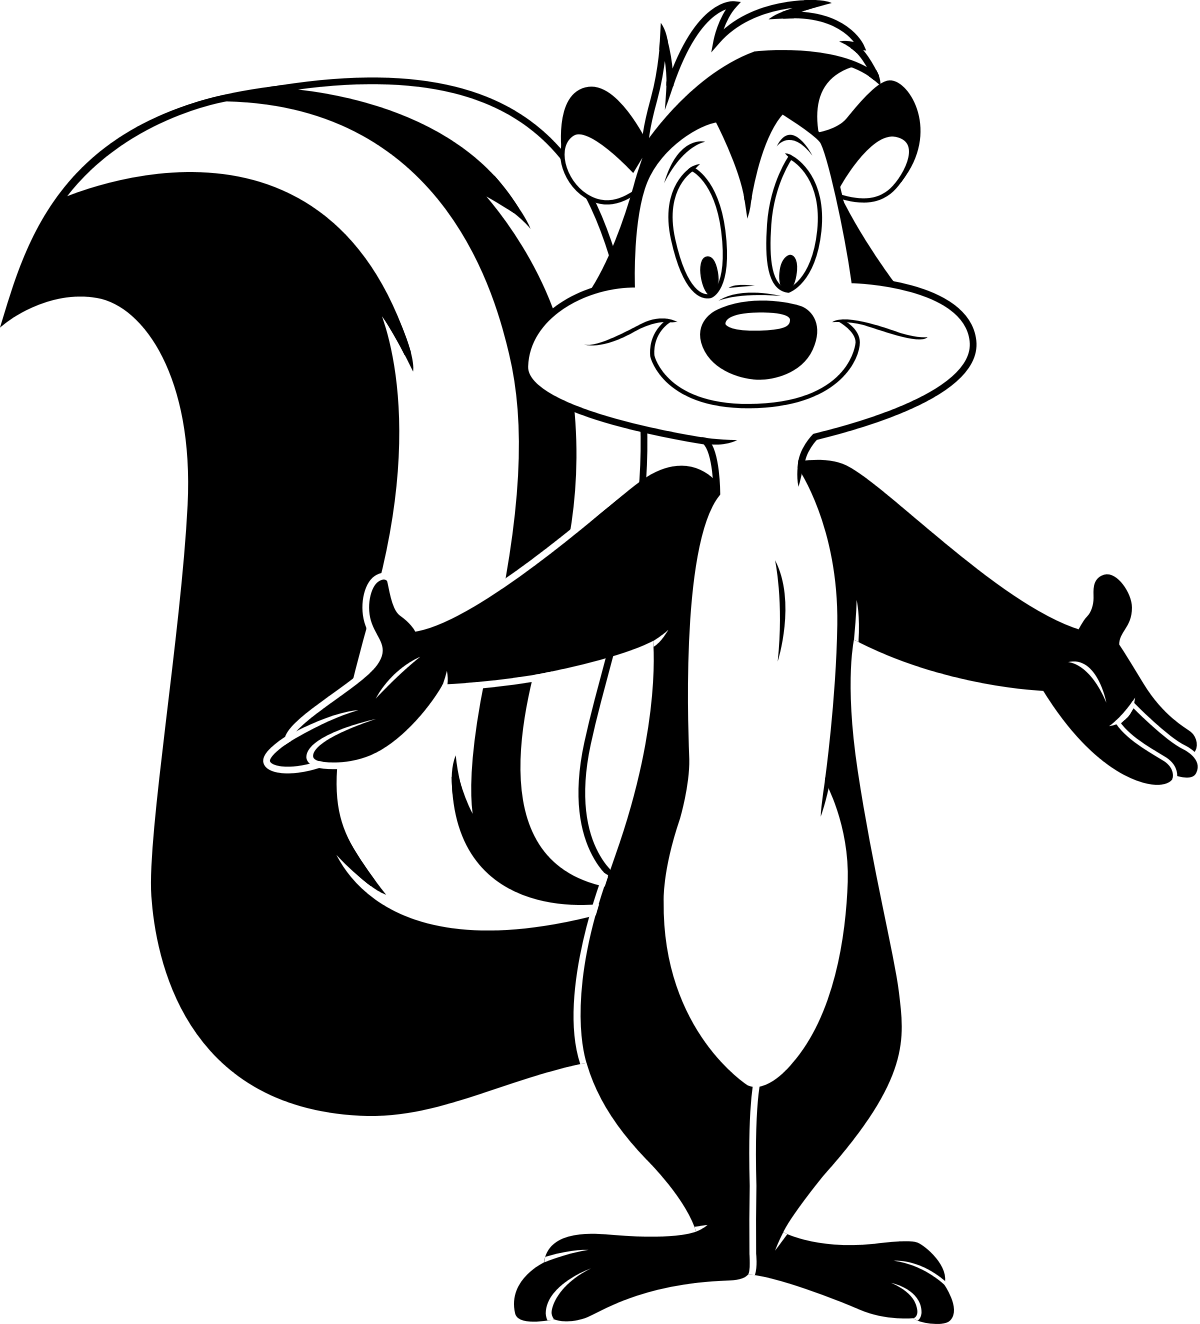 Pep le pew wikipedia. Face clipart skunk